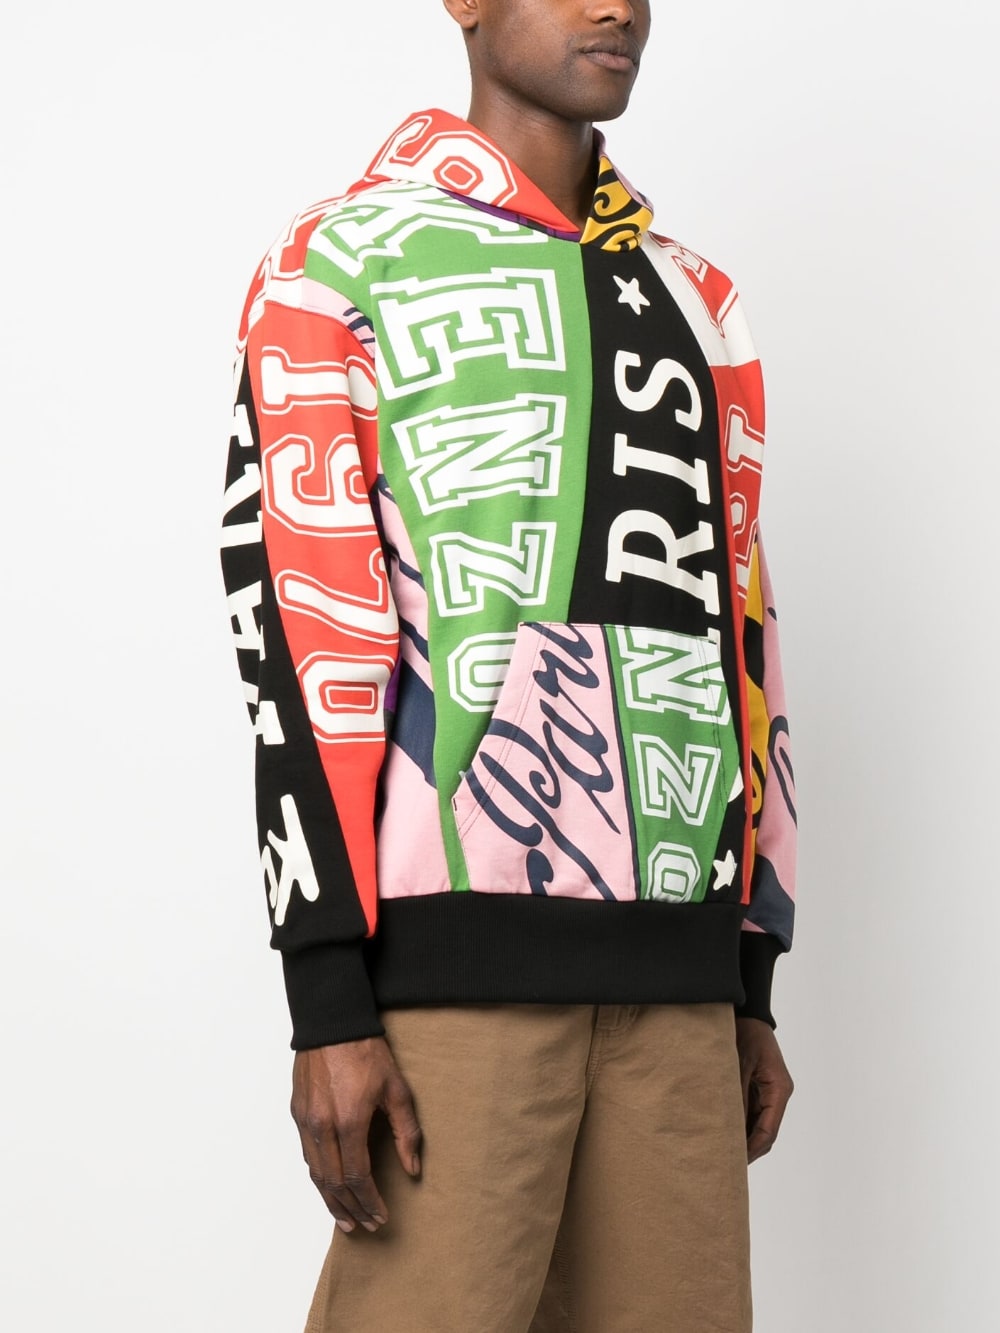 KENZO Multicolored Oversized Hoodie for Men - SS23 Collection